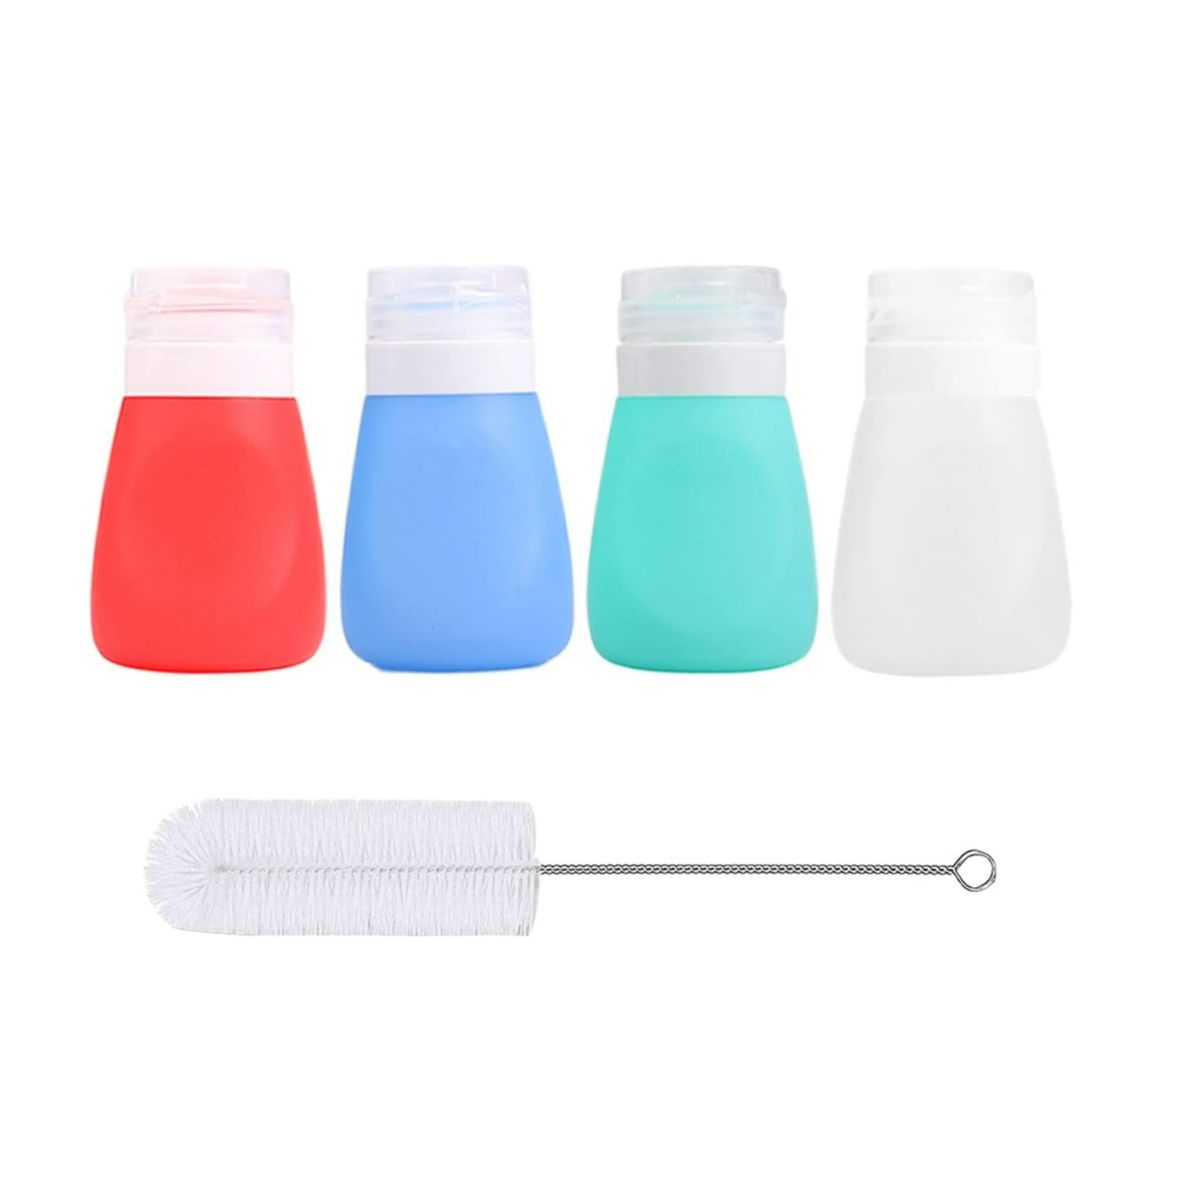 Four brightly colored silicone squeeze bottles for condiments and dressings